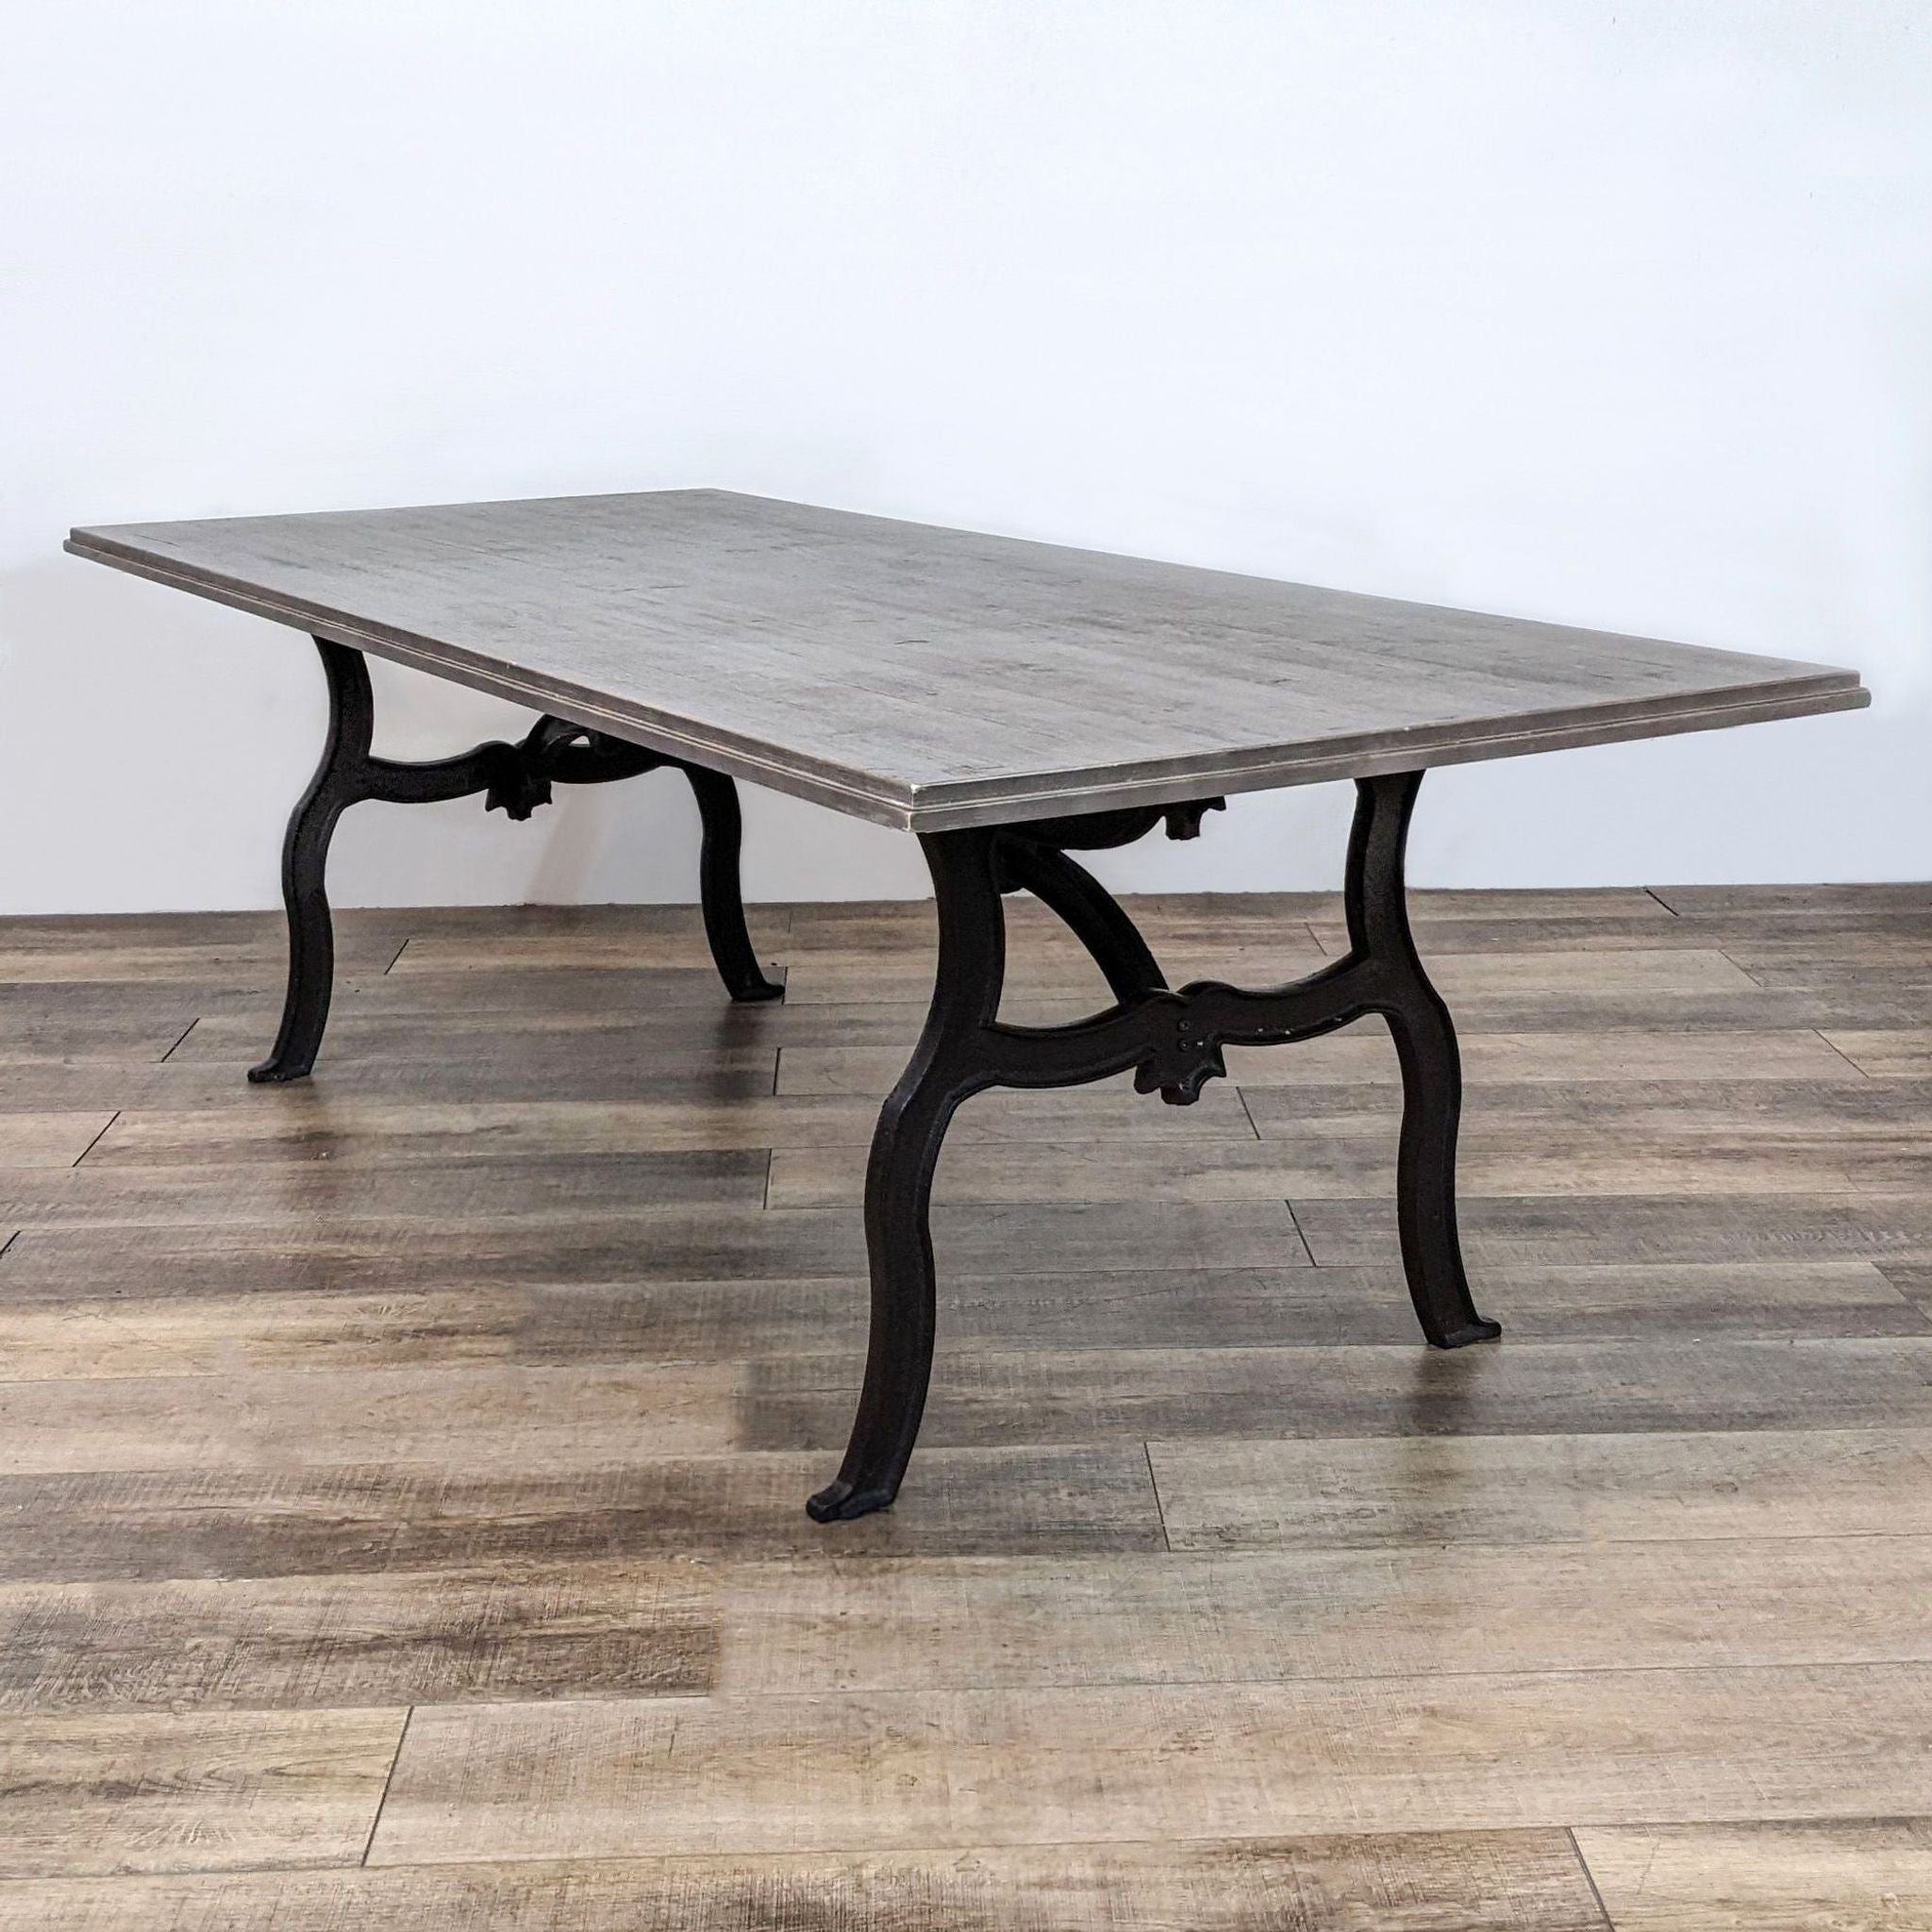 Alt text 2: Rectangular Reperch dining table featuring a rich distressed top and ornate scrolled black legs from a side angle.